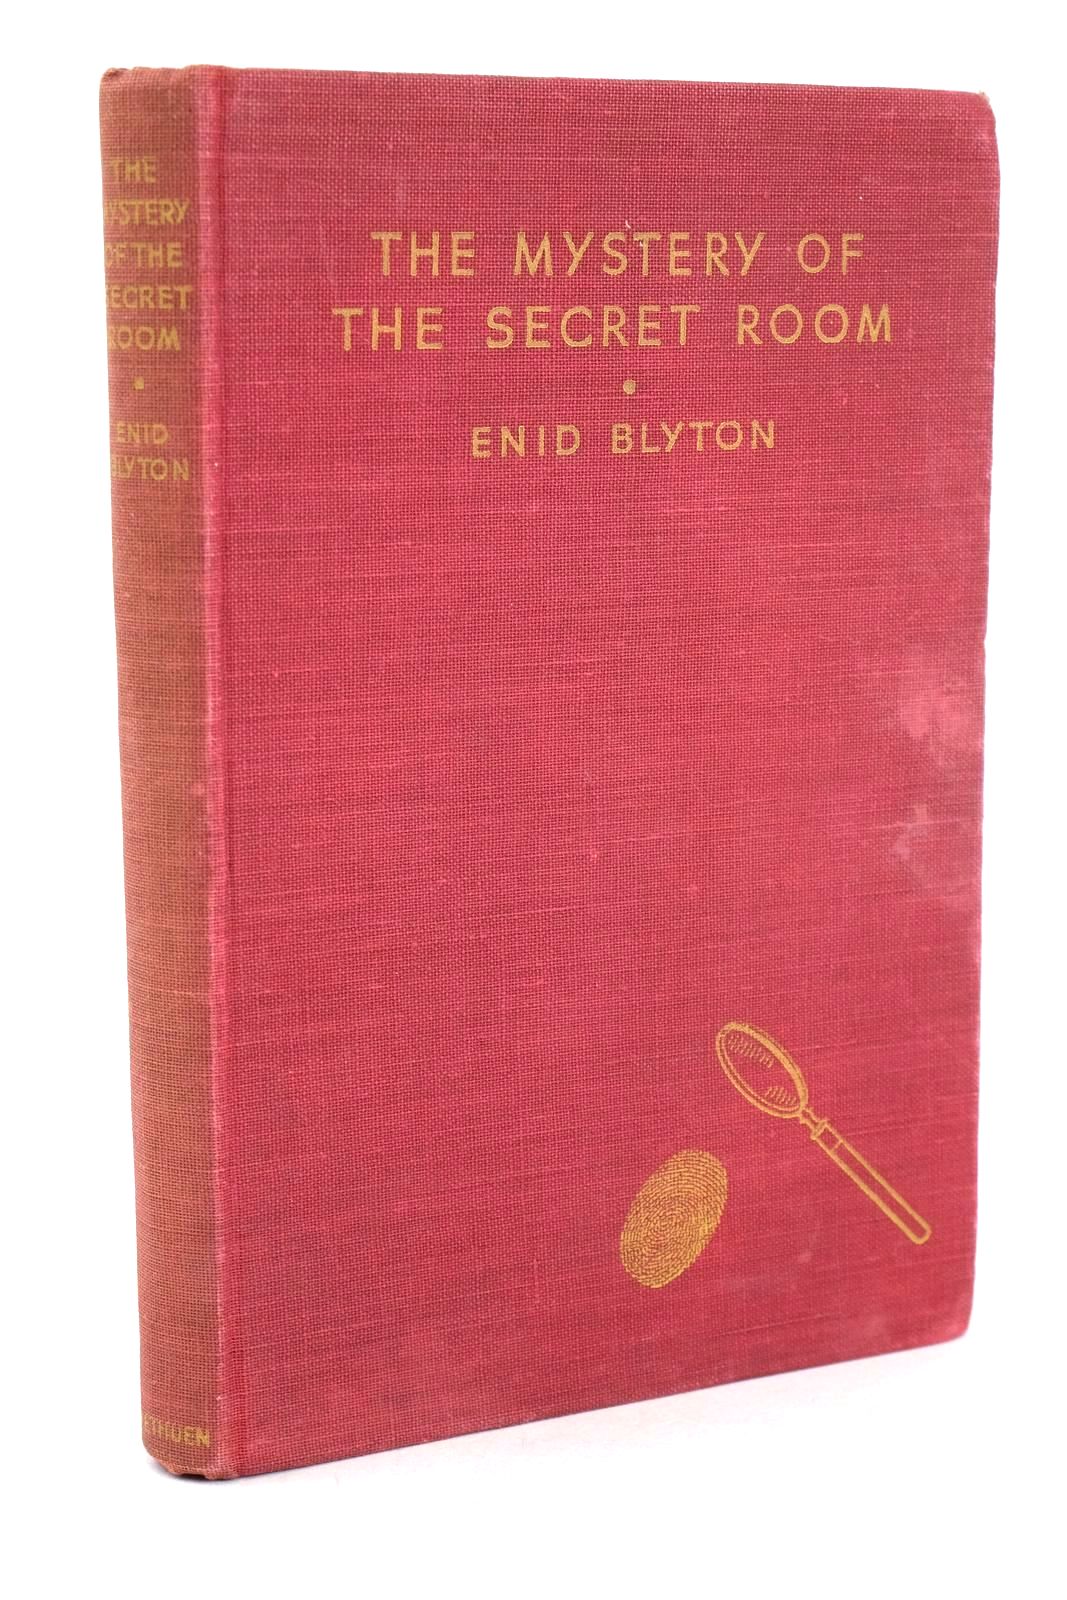 Photo of THE MYSTERY OF THE SECRET ROOM written by Blyton, Enid illustrated by Abbey, J. published by Methuen &amp; Co. Ltd. (STOCK CODE: 1326915)  for sale by Stella & Rose's Books